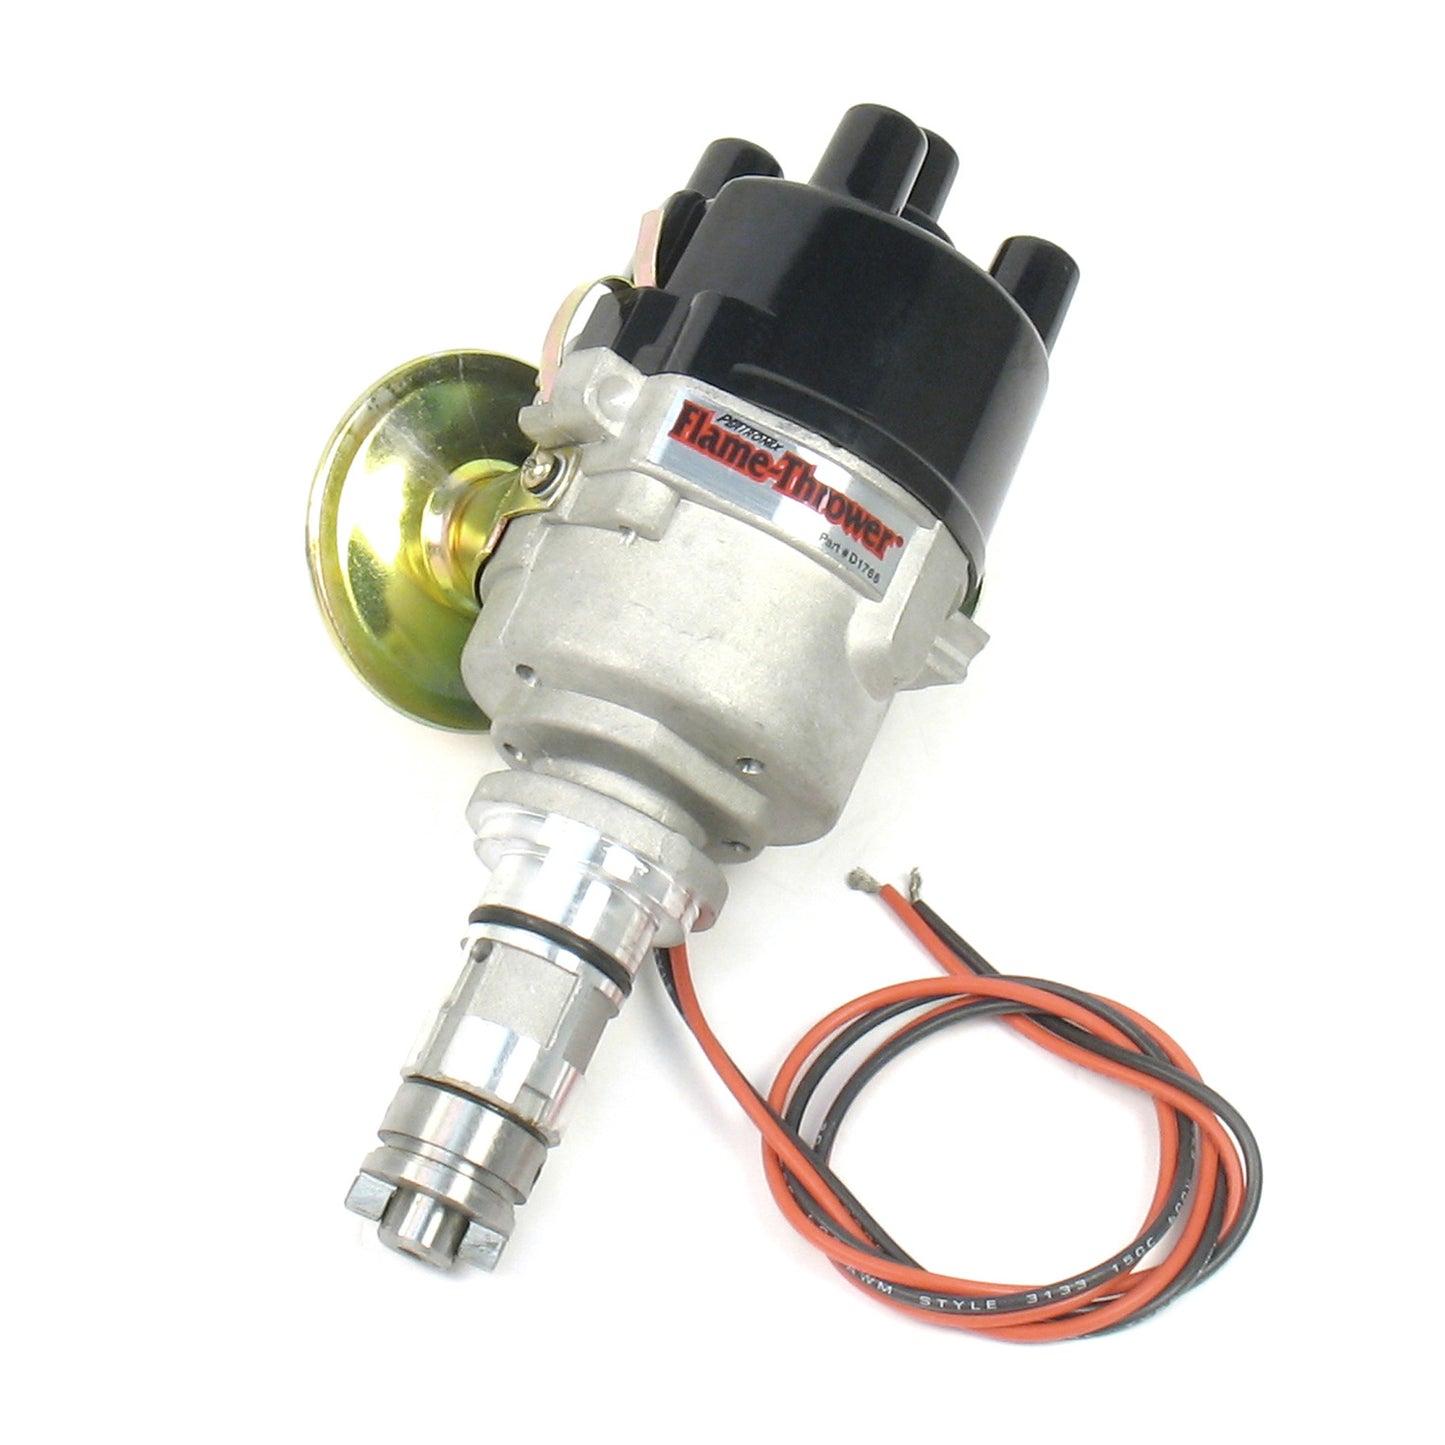 PerTronix D170618 Flame-Thrower Electronic Distributor Cast British 4 cyl Plug and Play with Ignitor II Technology with Vacuum